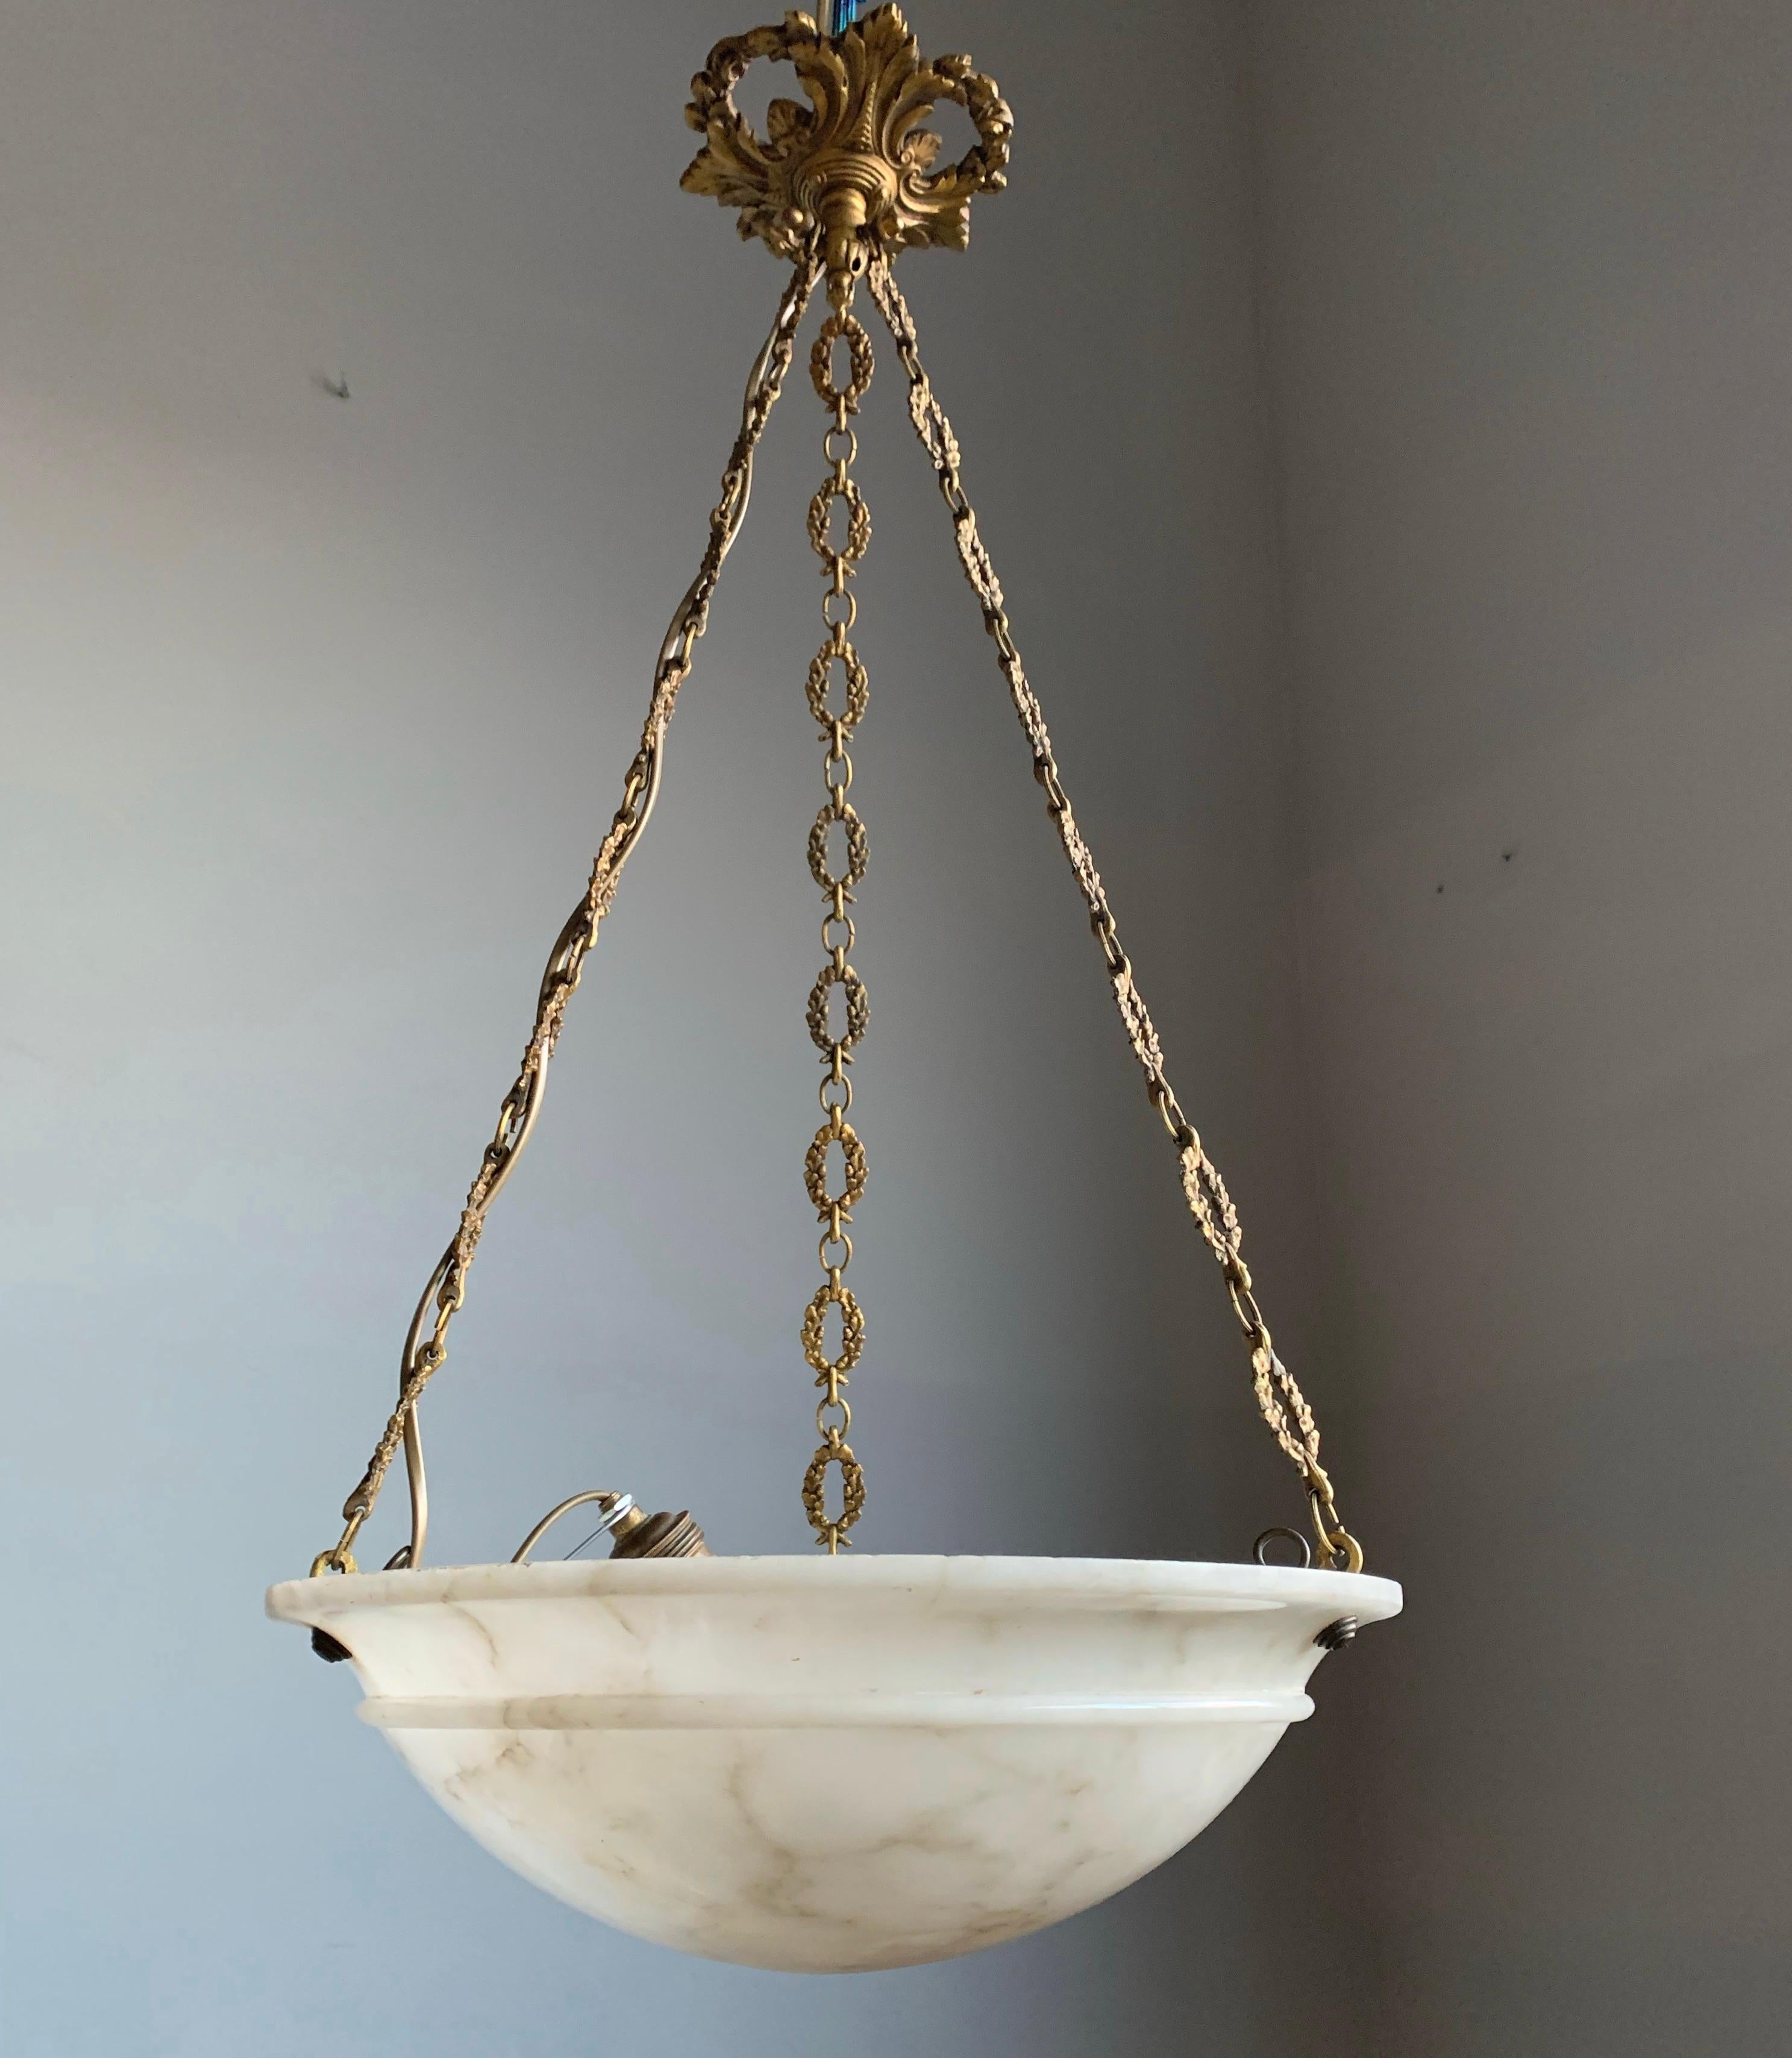 Another beautifully designed, all handcrafted and excellent condition, antique mineral stone chandelier.

If you are looking for a good condition and good size Art Deco light fixture then this fine specimen with its unique pattern of veins could be